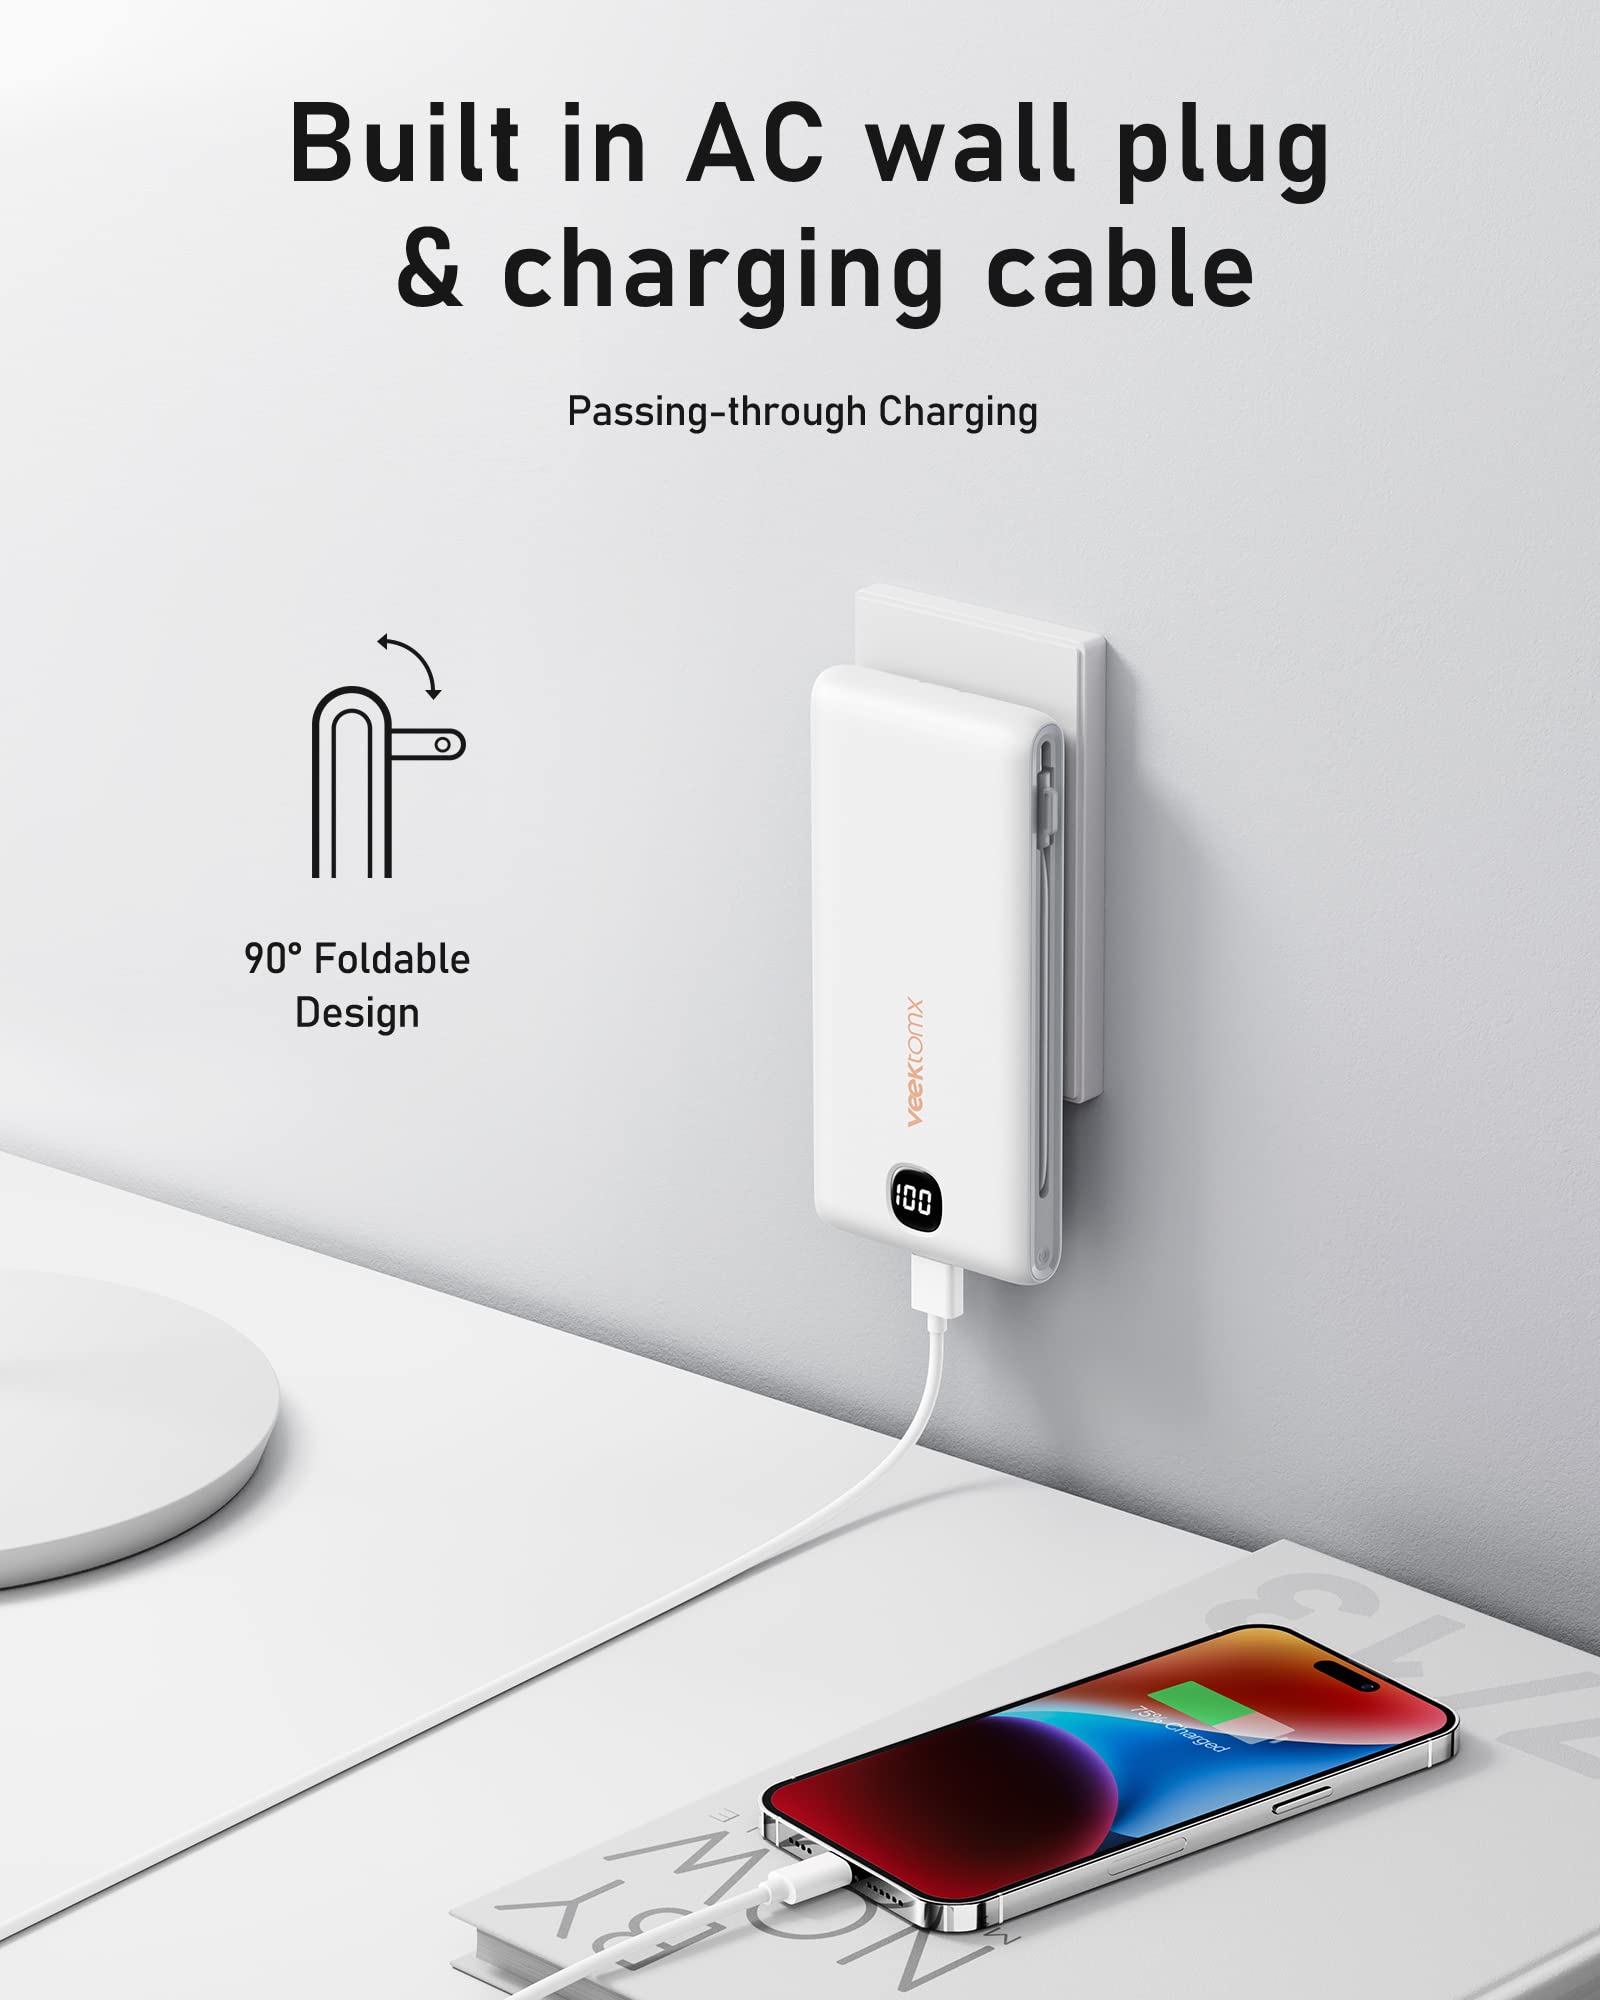 VEEKTOMX Power Bank with Built in Cables 22.5W 10000mAh, Portable Charger for iPhone with AC Wall Plug, Fast Charging USB C Slim iPhone Charger with LED Display Compatible with iPhone15/14/13, Samsung